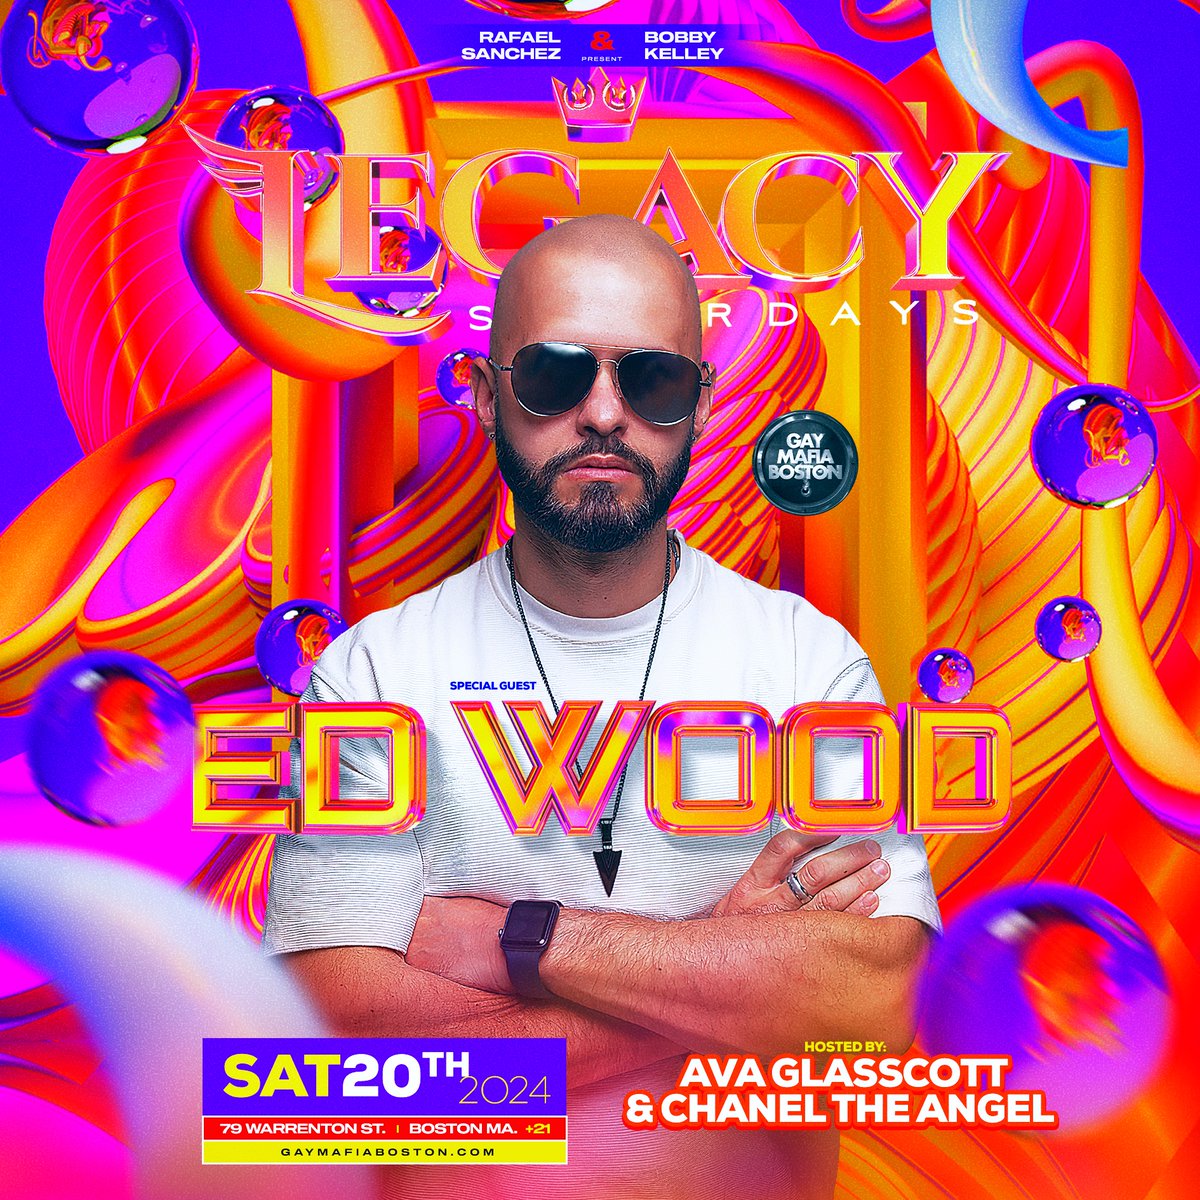 We have @djedwood at Legacy Saturdays tonight! Hosted by @AvaGlasscott & @ChanelTheAngel!